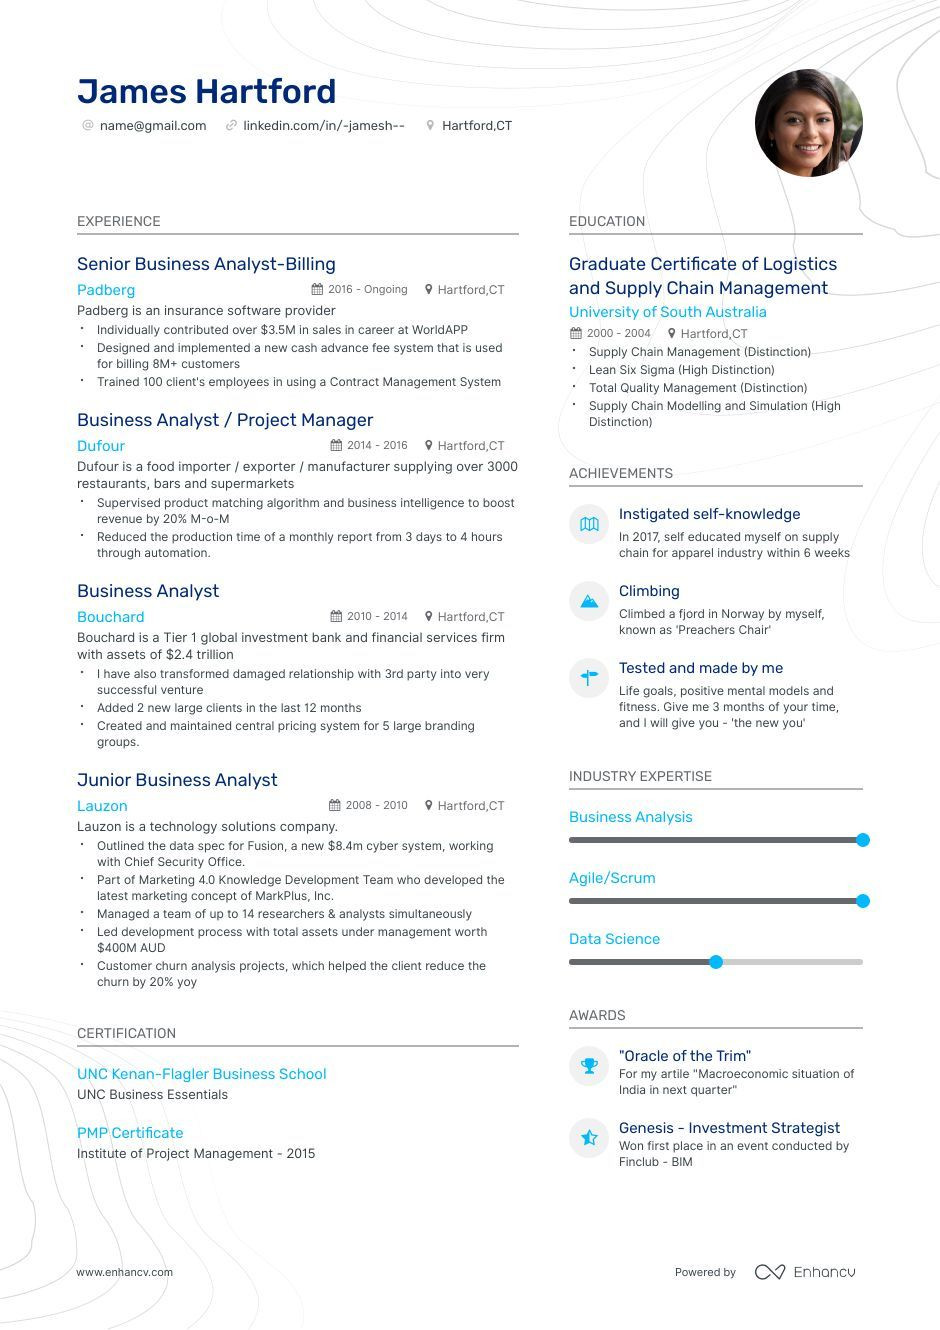 Business Analyst Skills List In Resume Sample the Best Business Analyst Resume Examples & Guide for 2022 (layout …